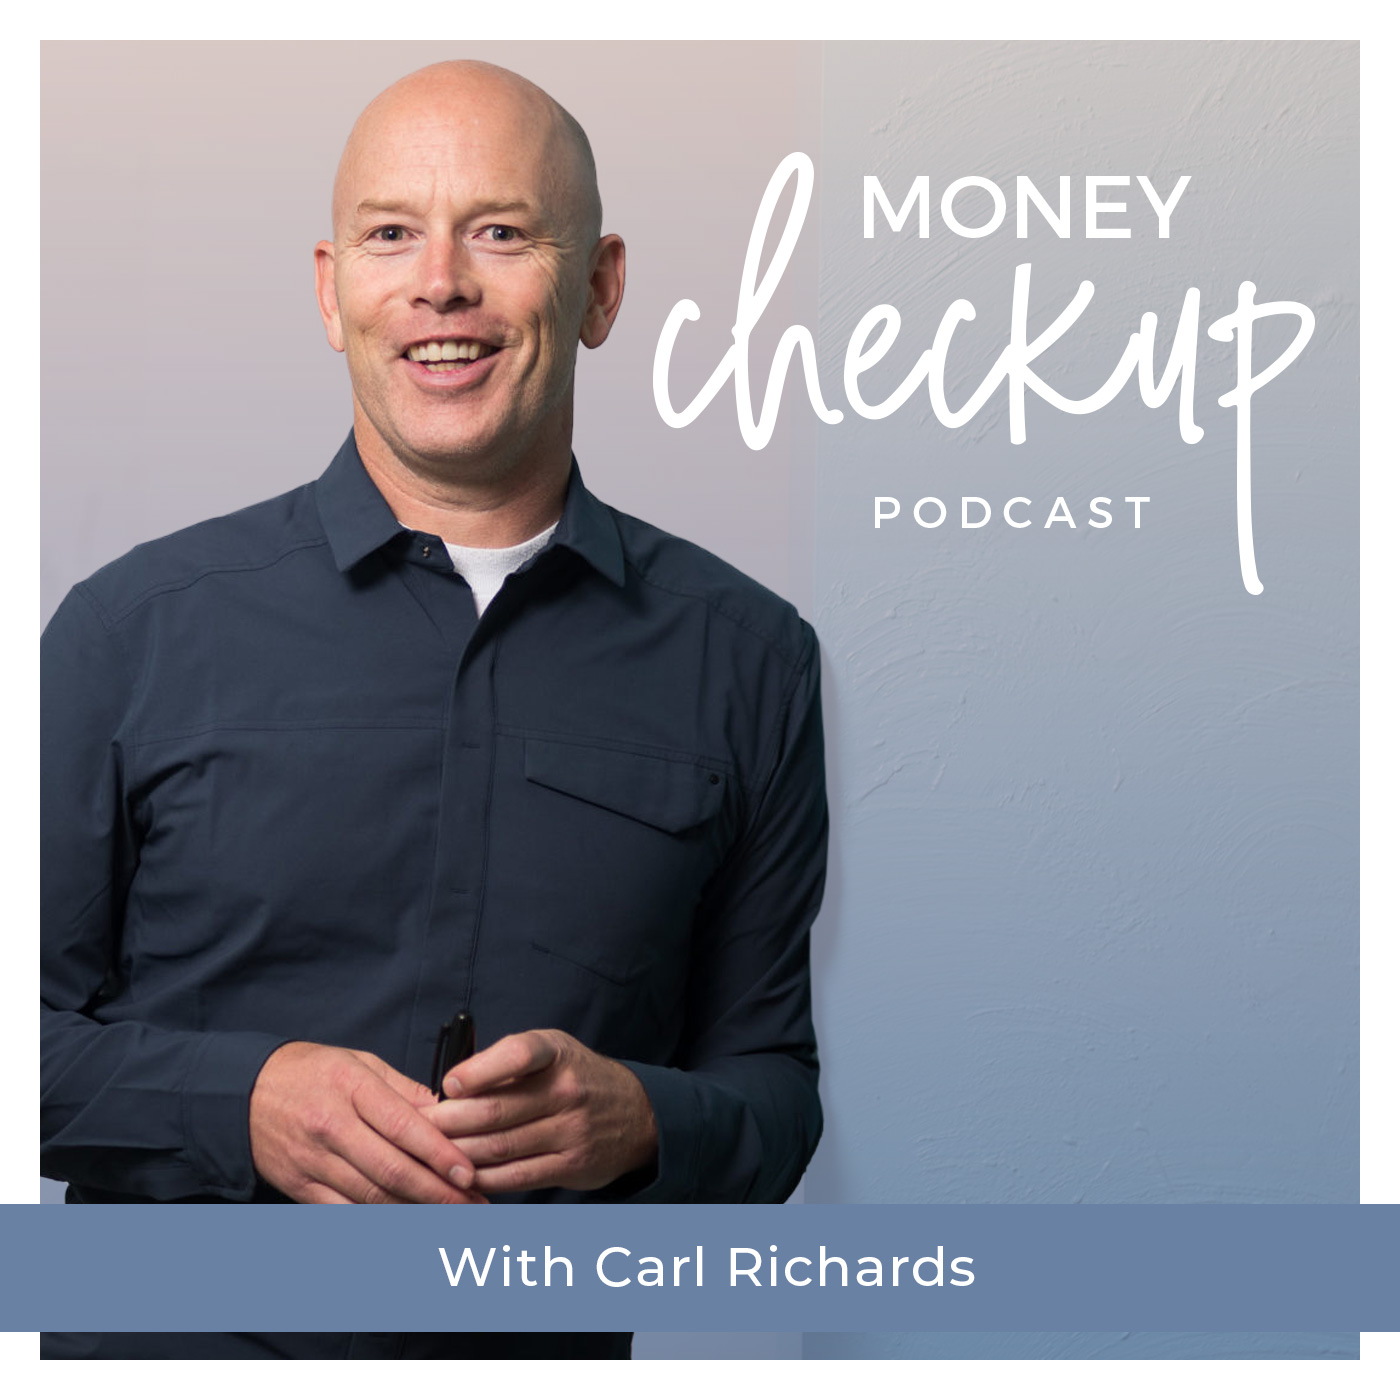 Money Checkup Podcast With Carl Richards